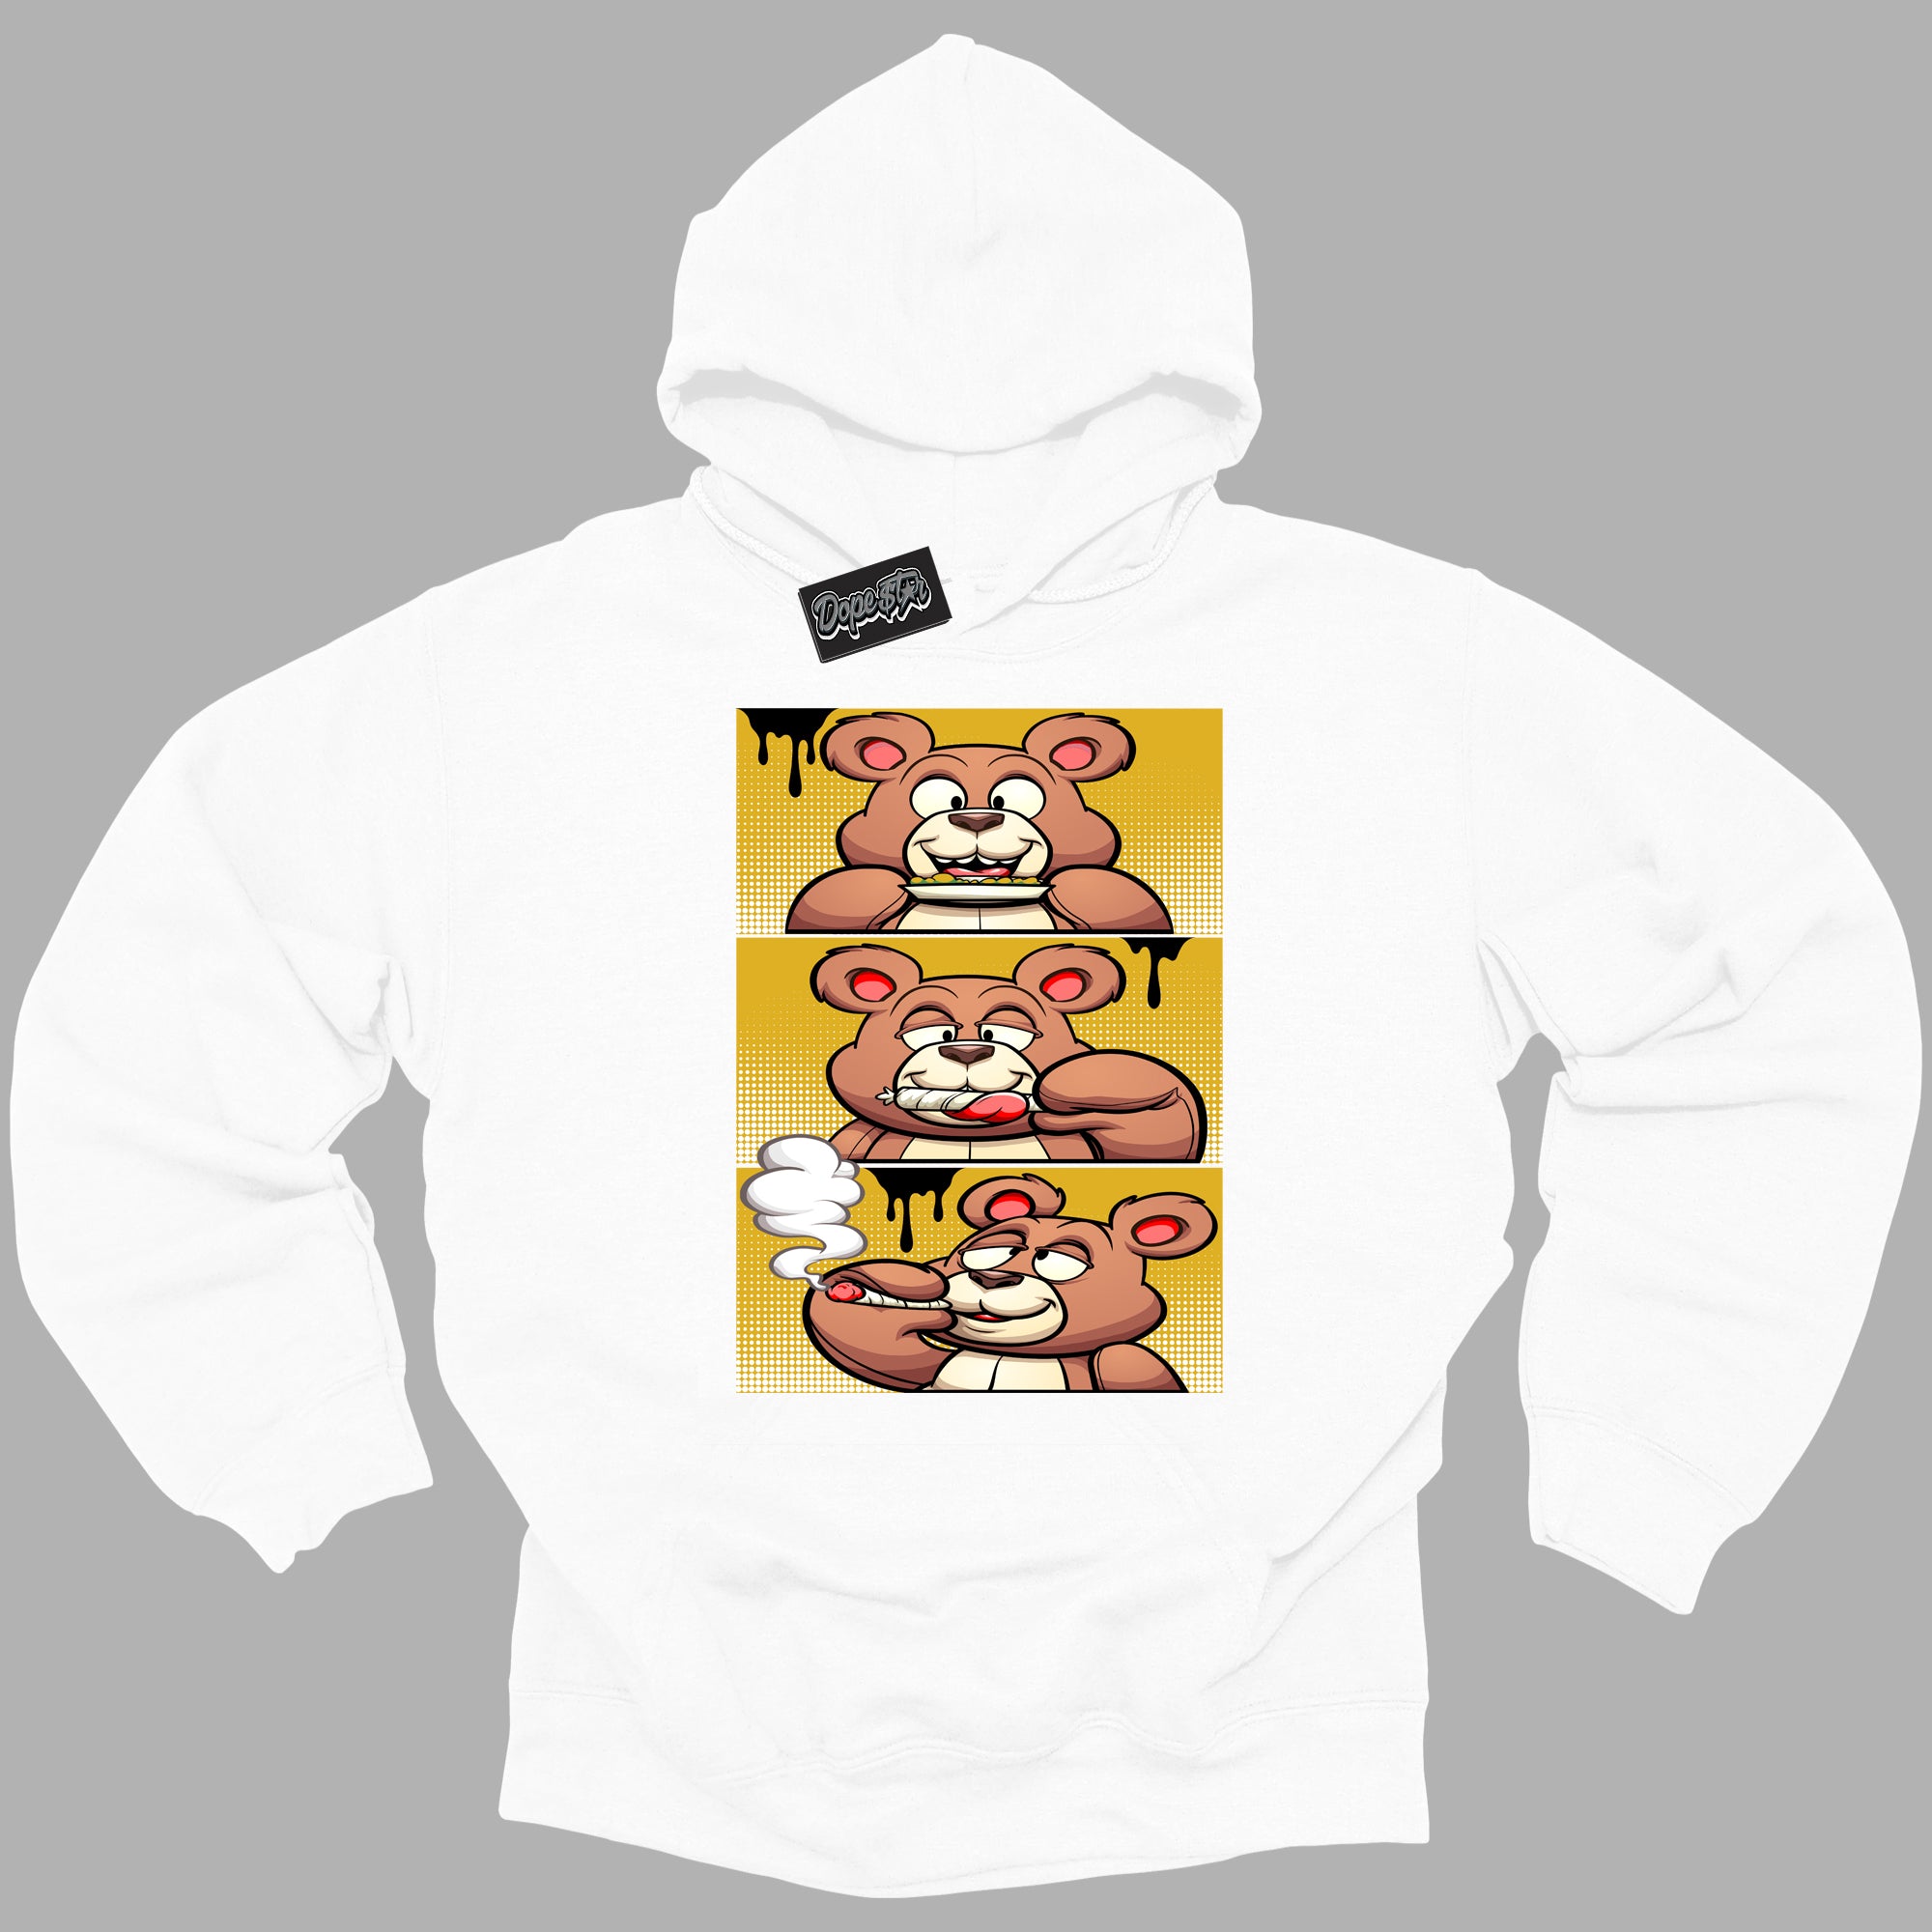 Cool White Hoodie with “ Roll It Lick It Smoke It Bear ”  design that Perfectly Matches Yellow Ochre 6s Sneakers.